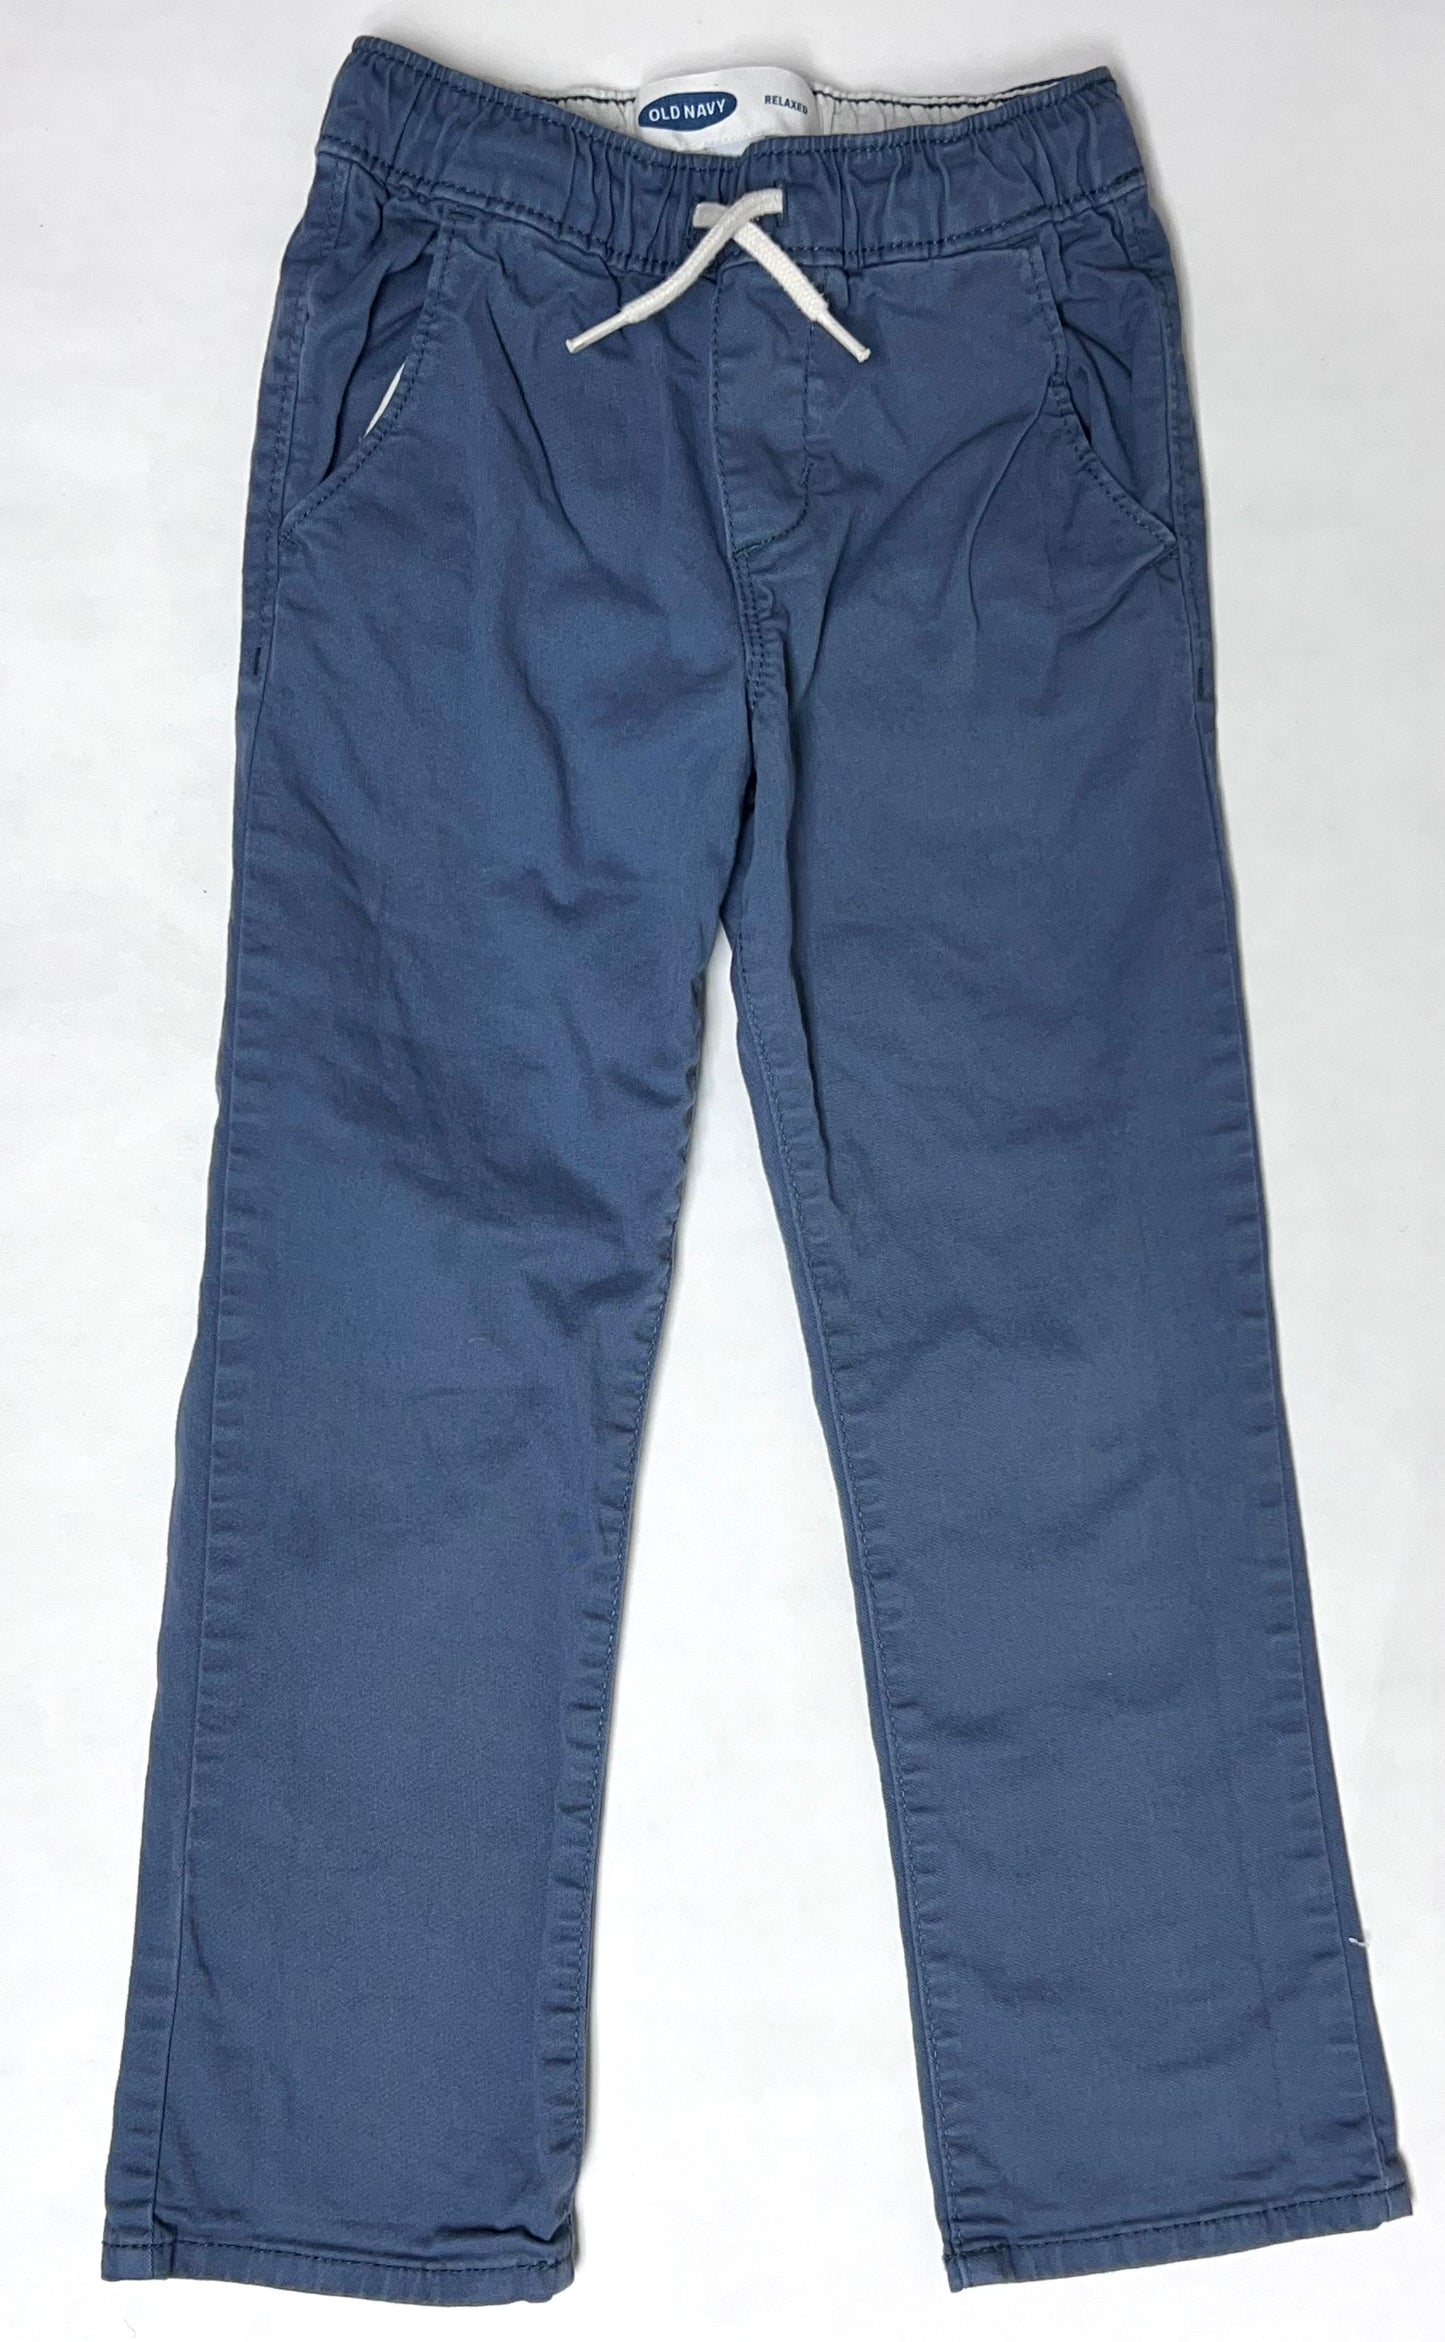 Boys 4T Old navy relaxed fit pants with stretchy waist in dusty blue, VGUC